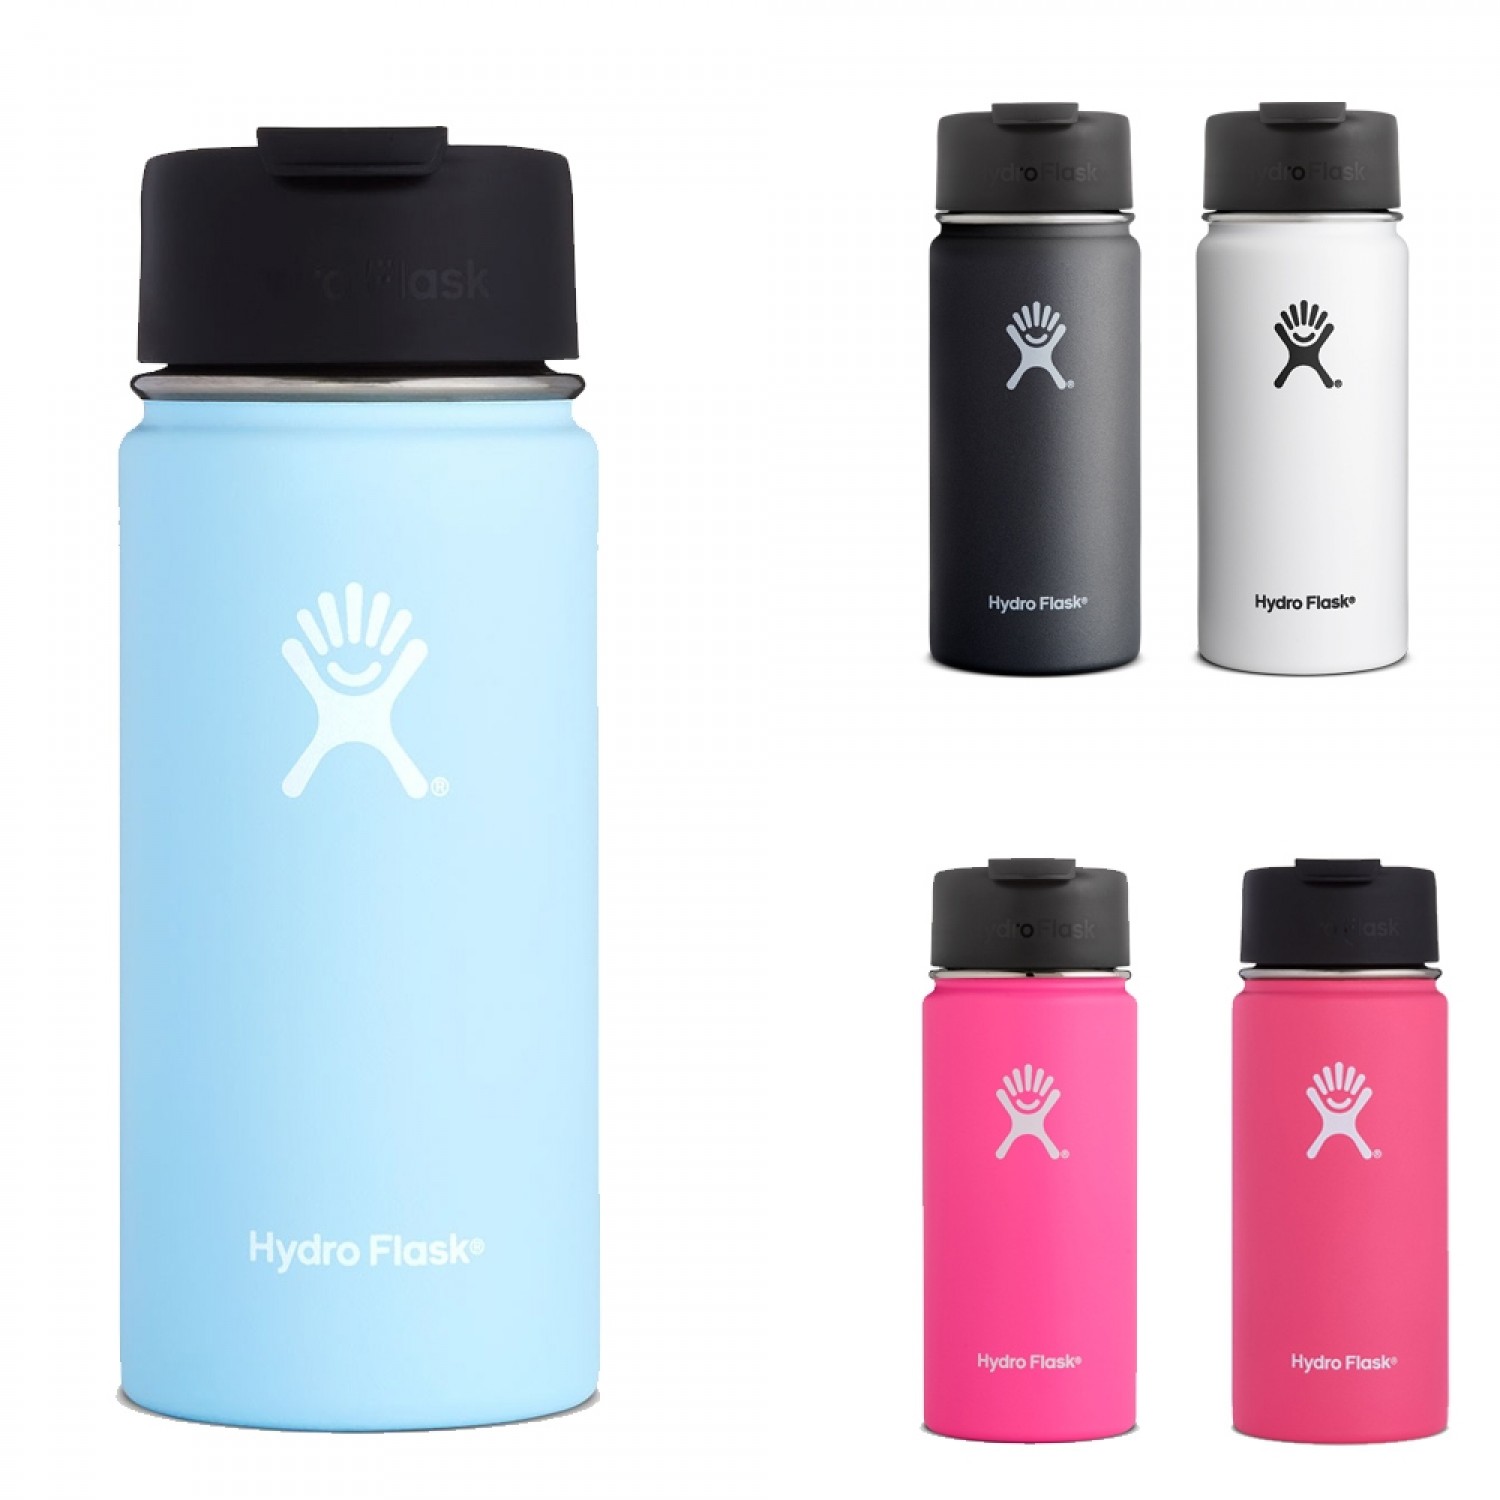 hydro flask coffee thermos